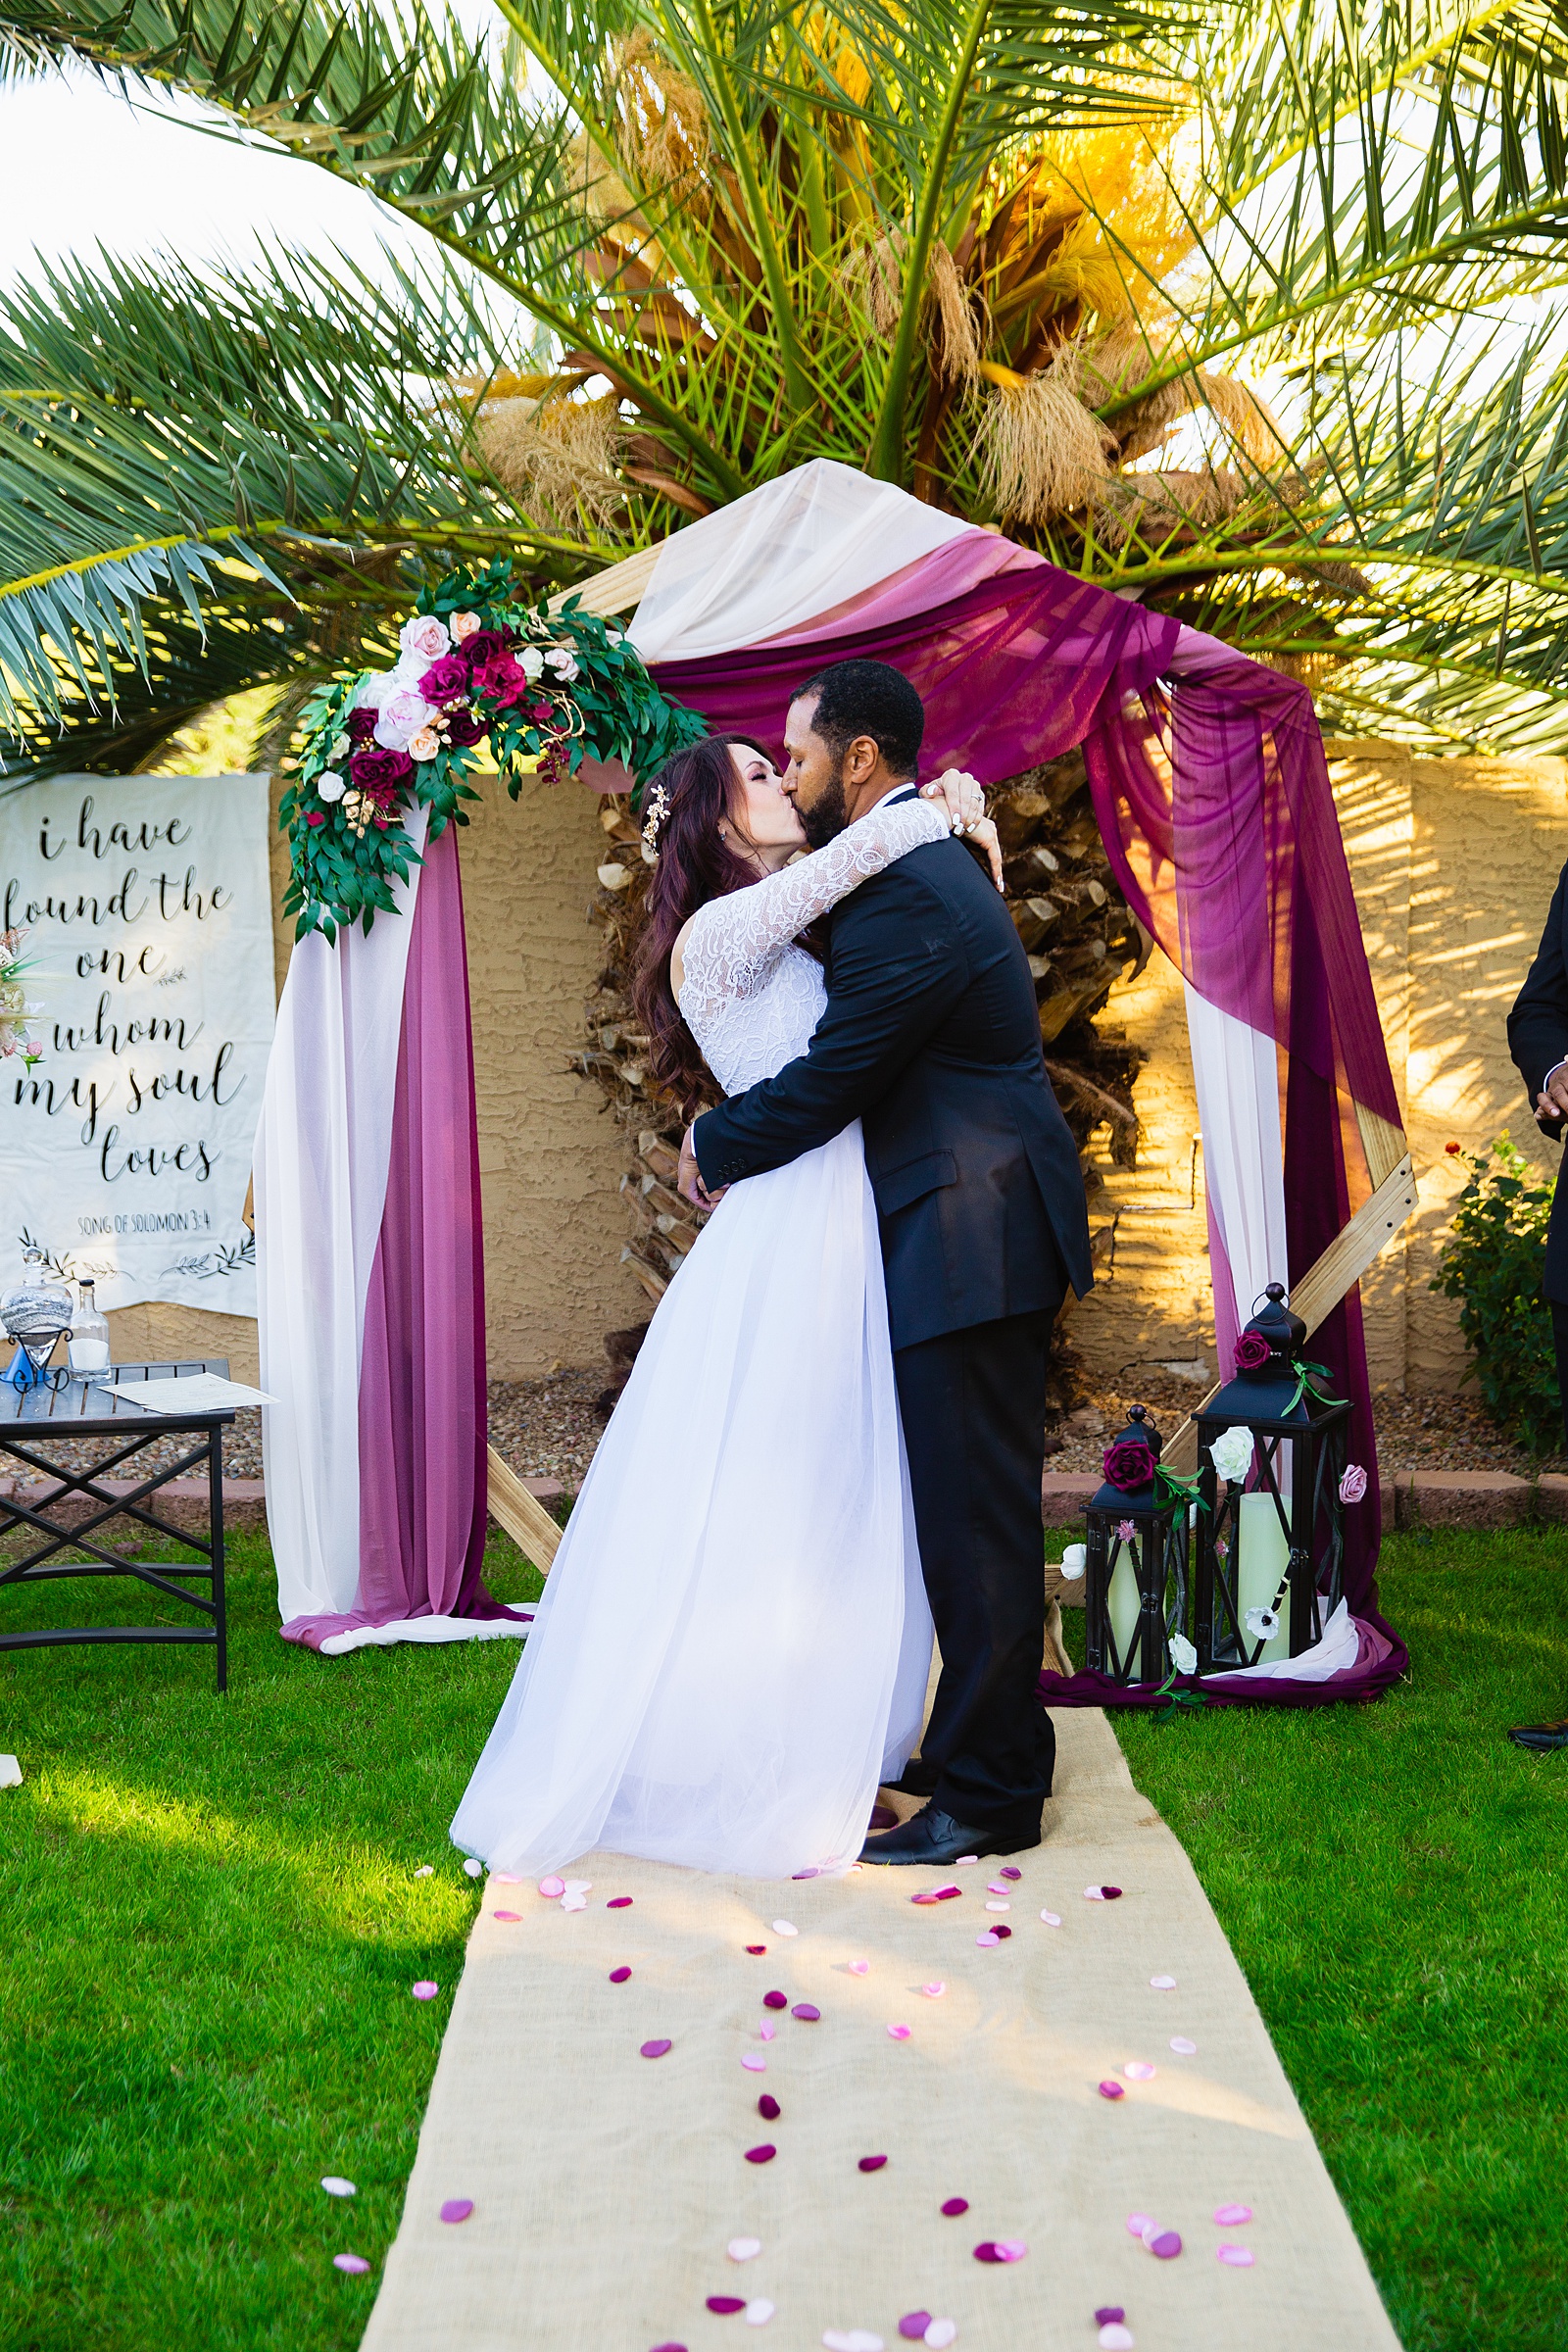 Bride and groom share their first kiss during their wedding ceremony at Backyard Micro by Arizona wedding photographer PMA Photography.